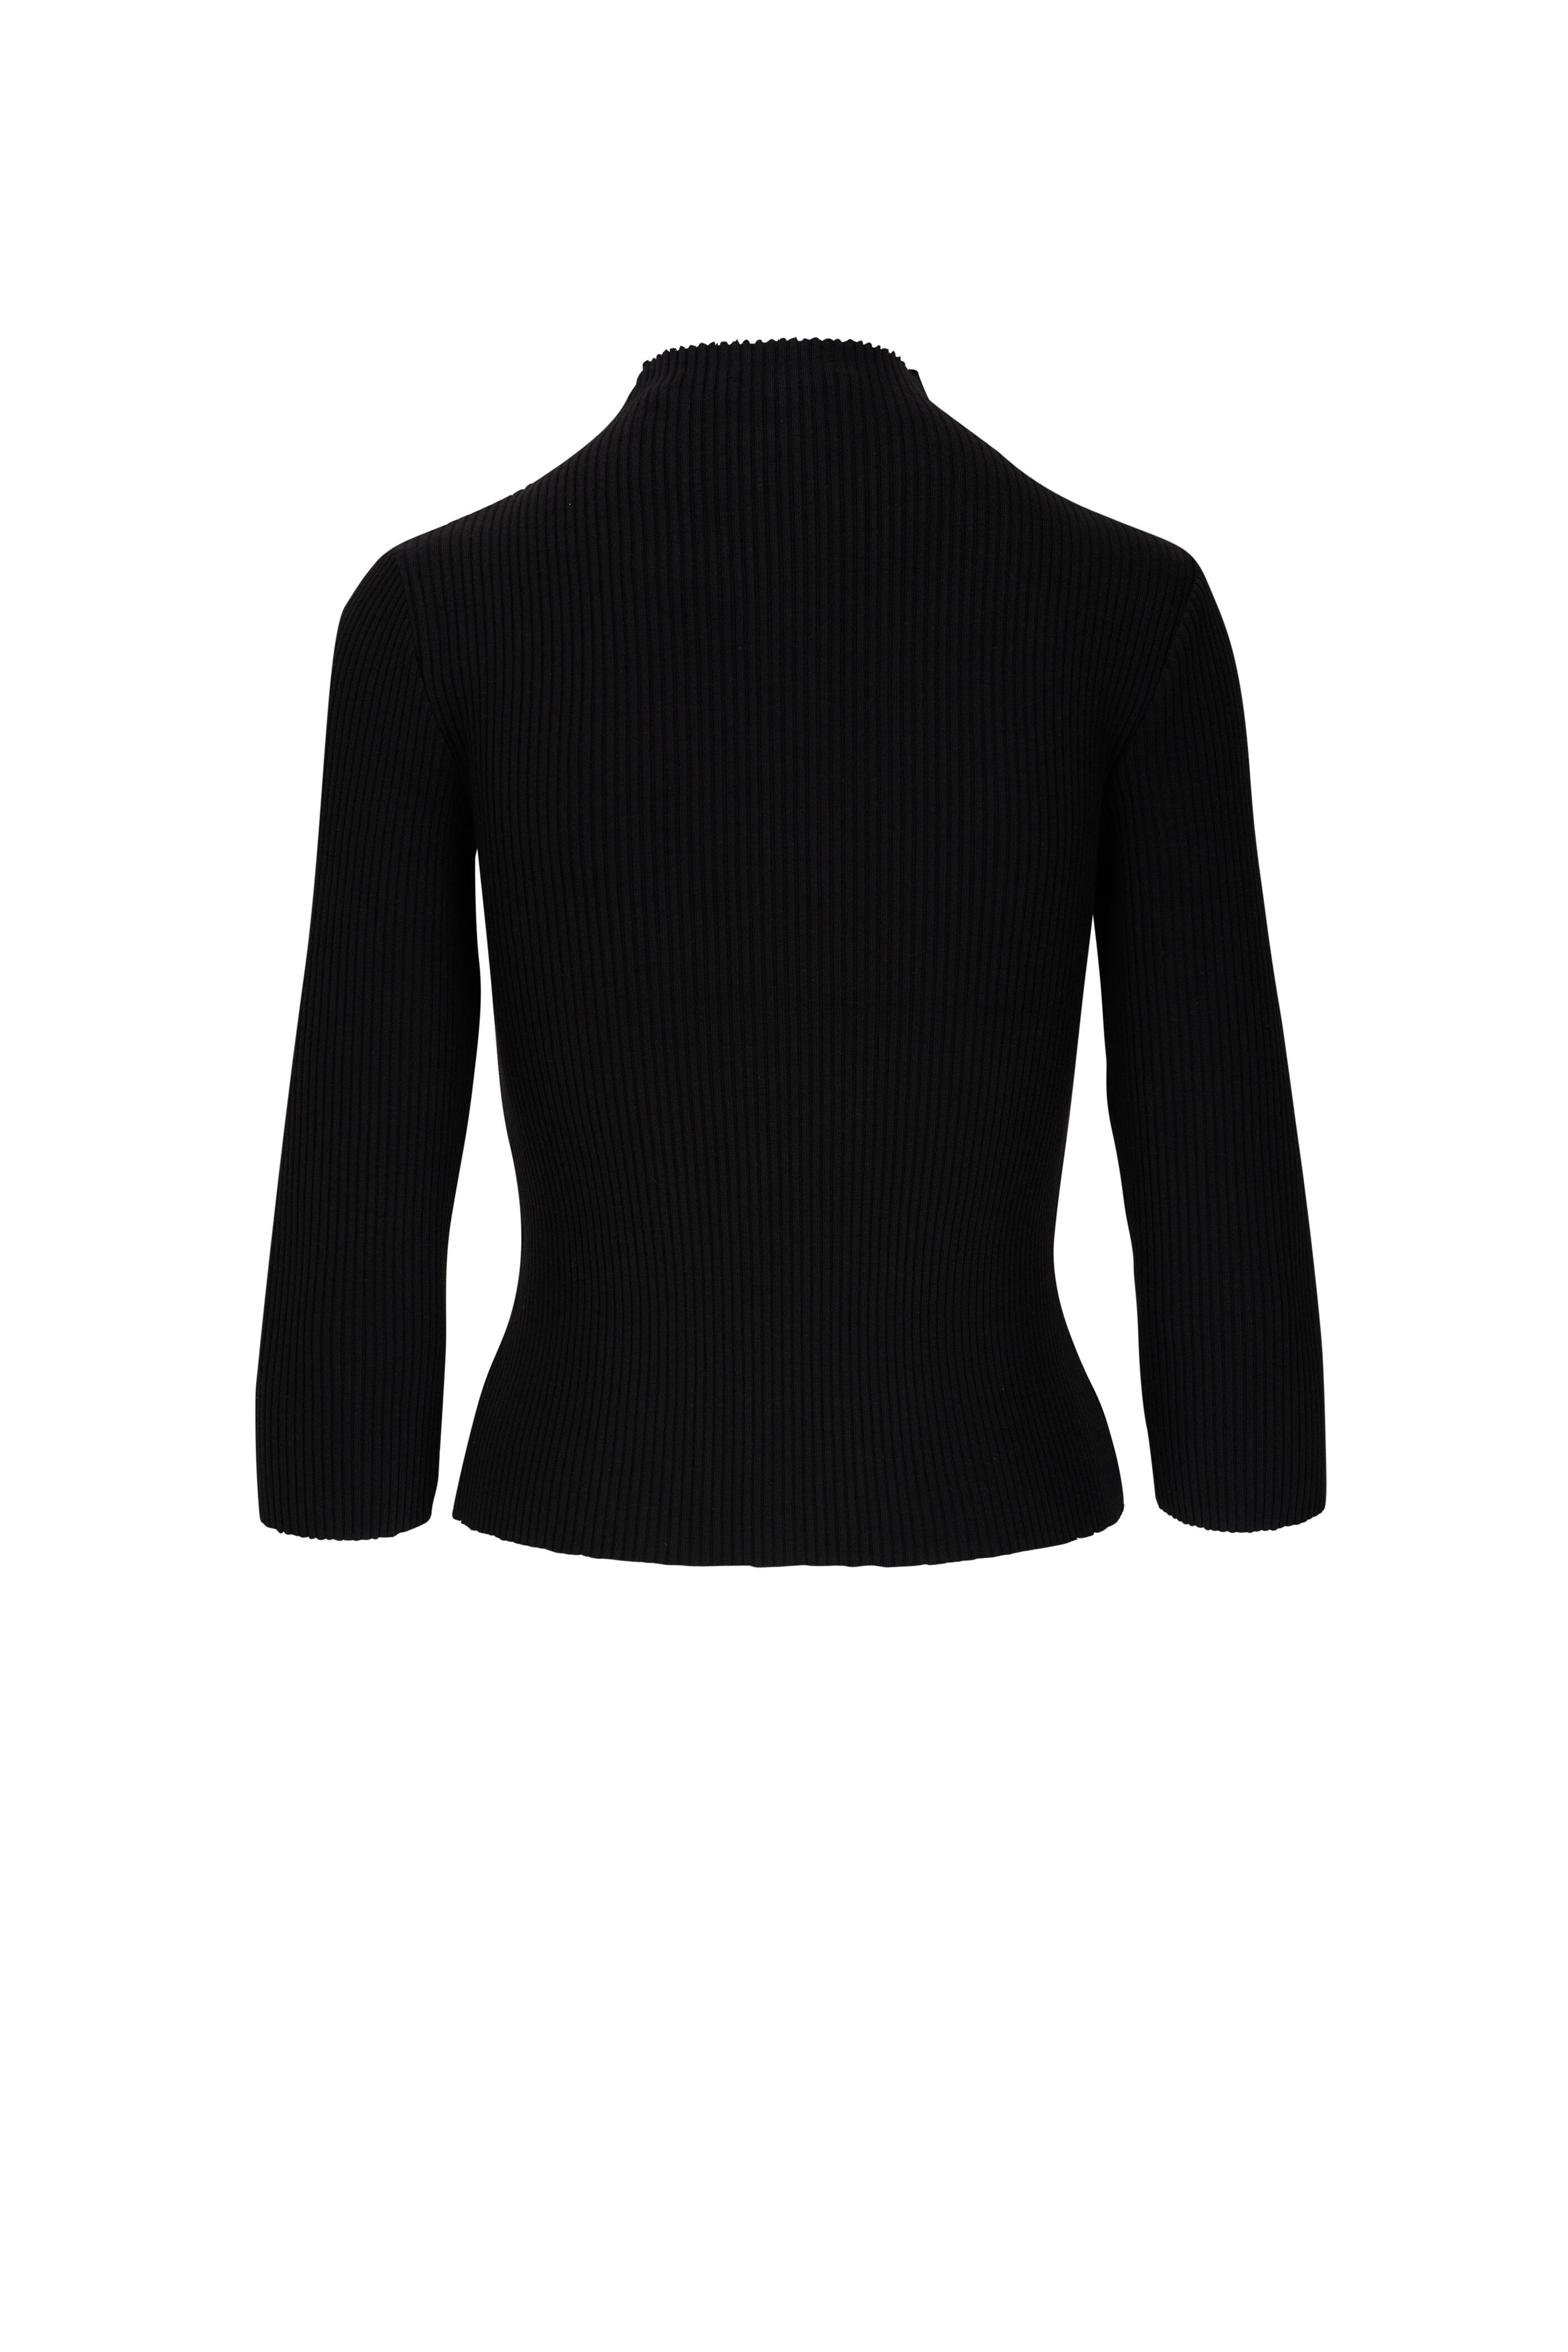 Vince - Black Ribbed Knit Quarter Zip Top | Mitchell Stores